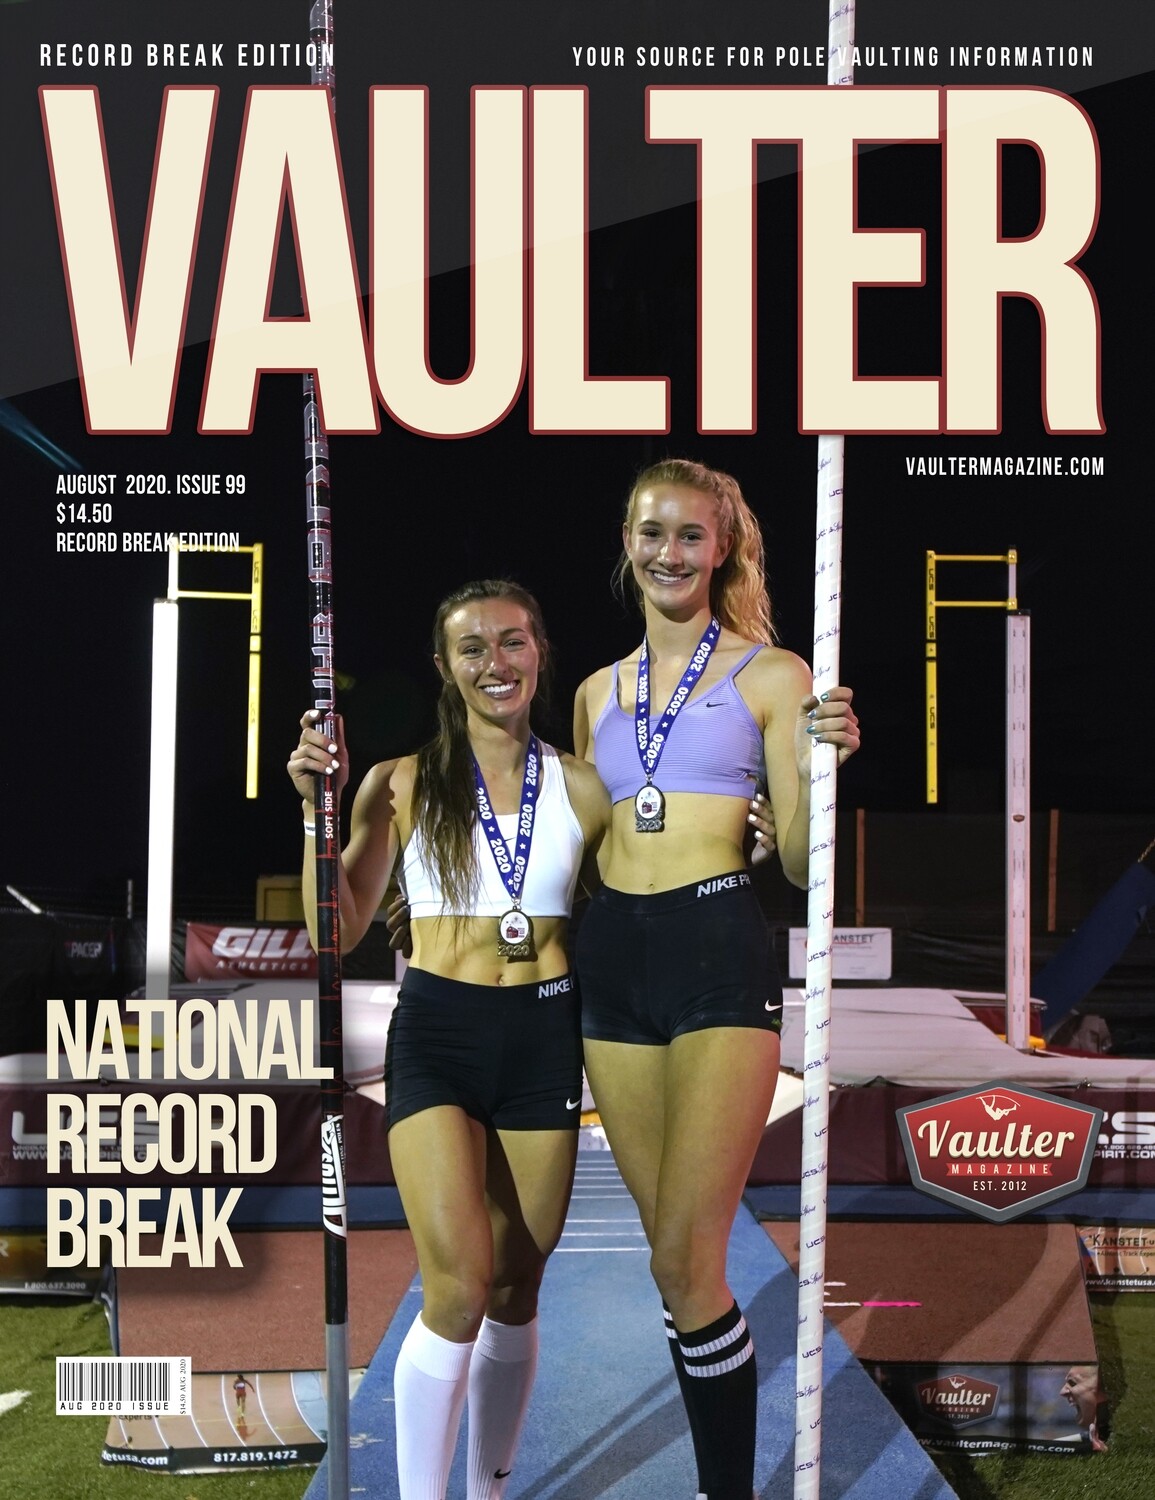 August 2020 National Record Break Issue of Vaulter Magazine - Poster